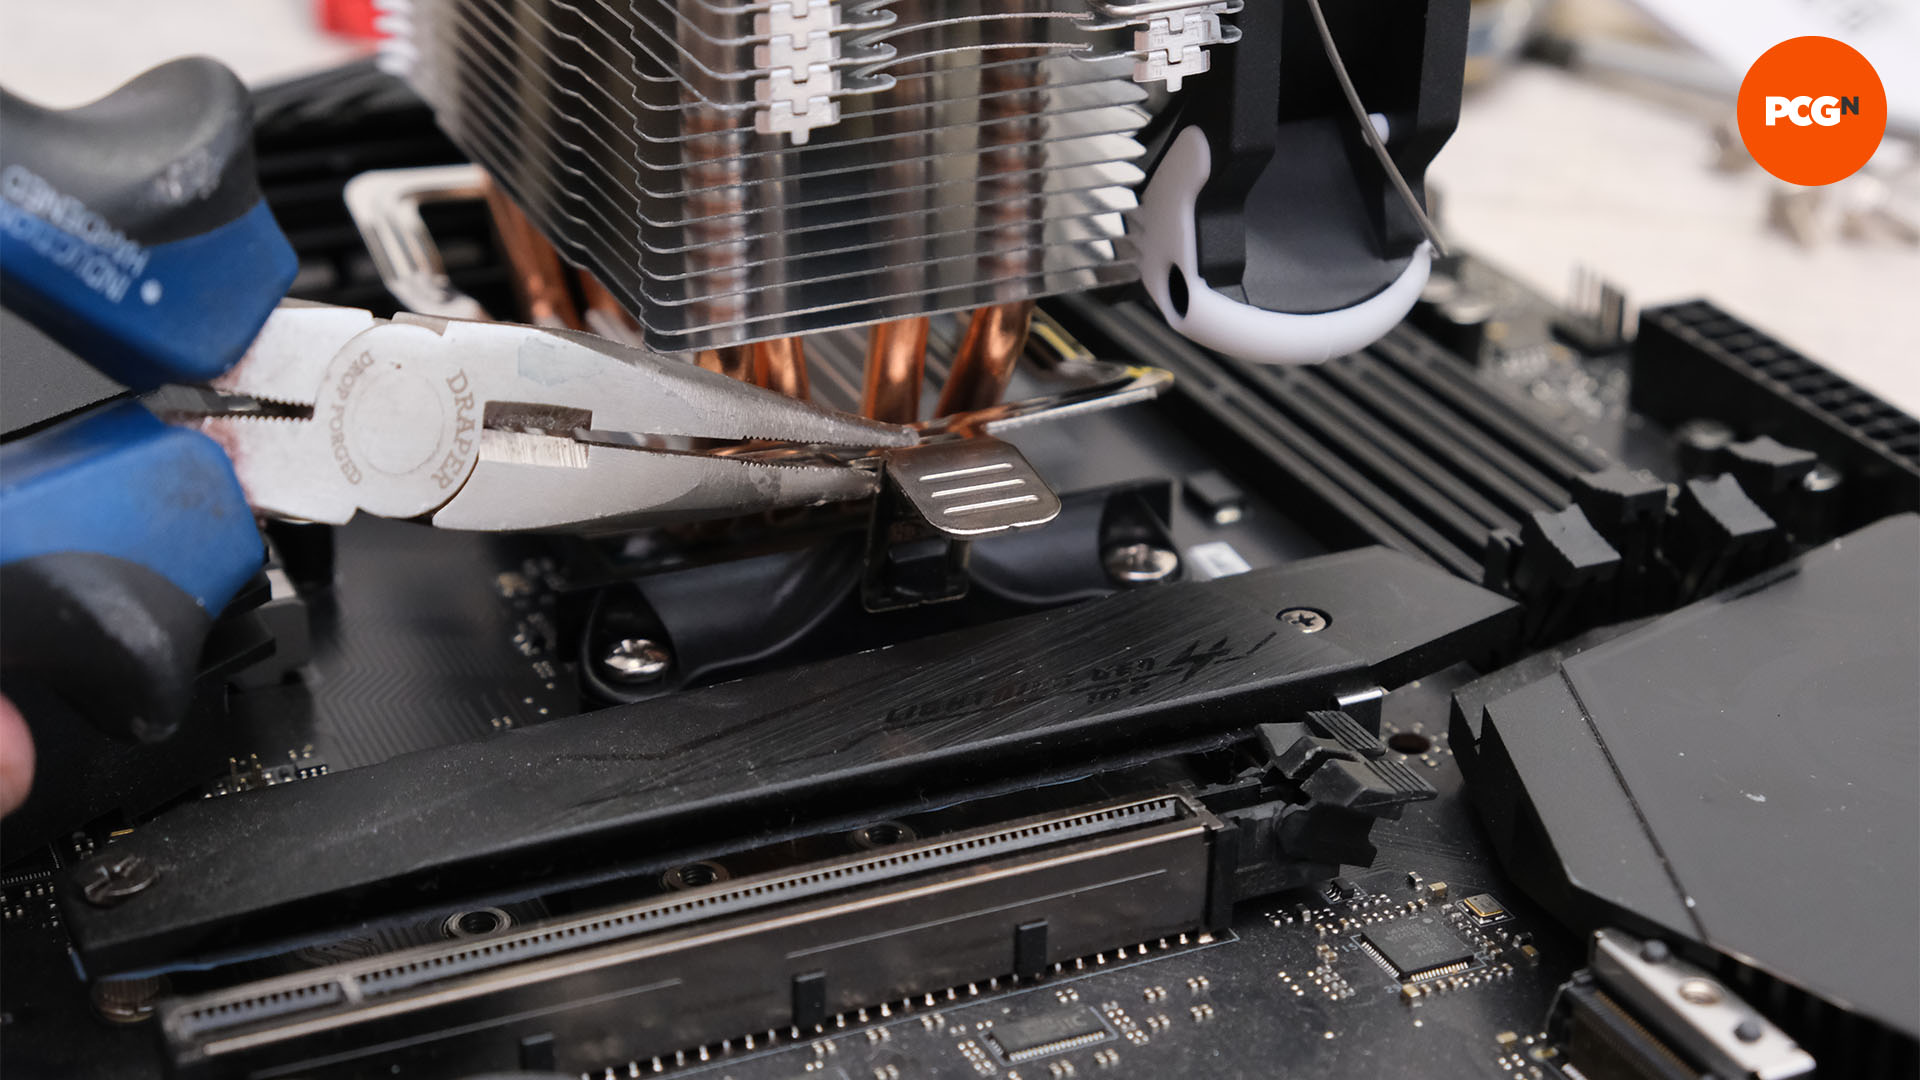 How to build a gaming PC: Remove AMD cooler